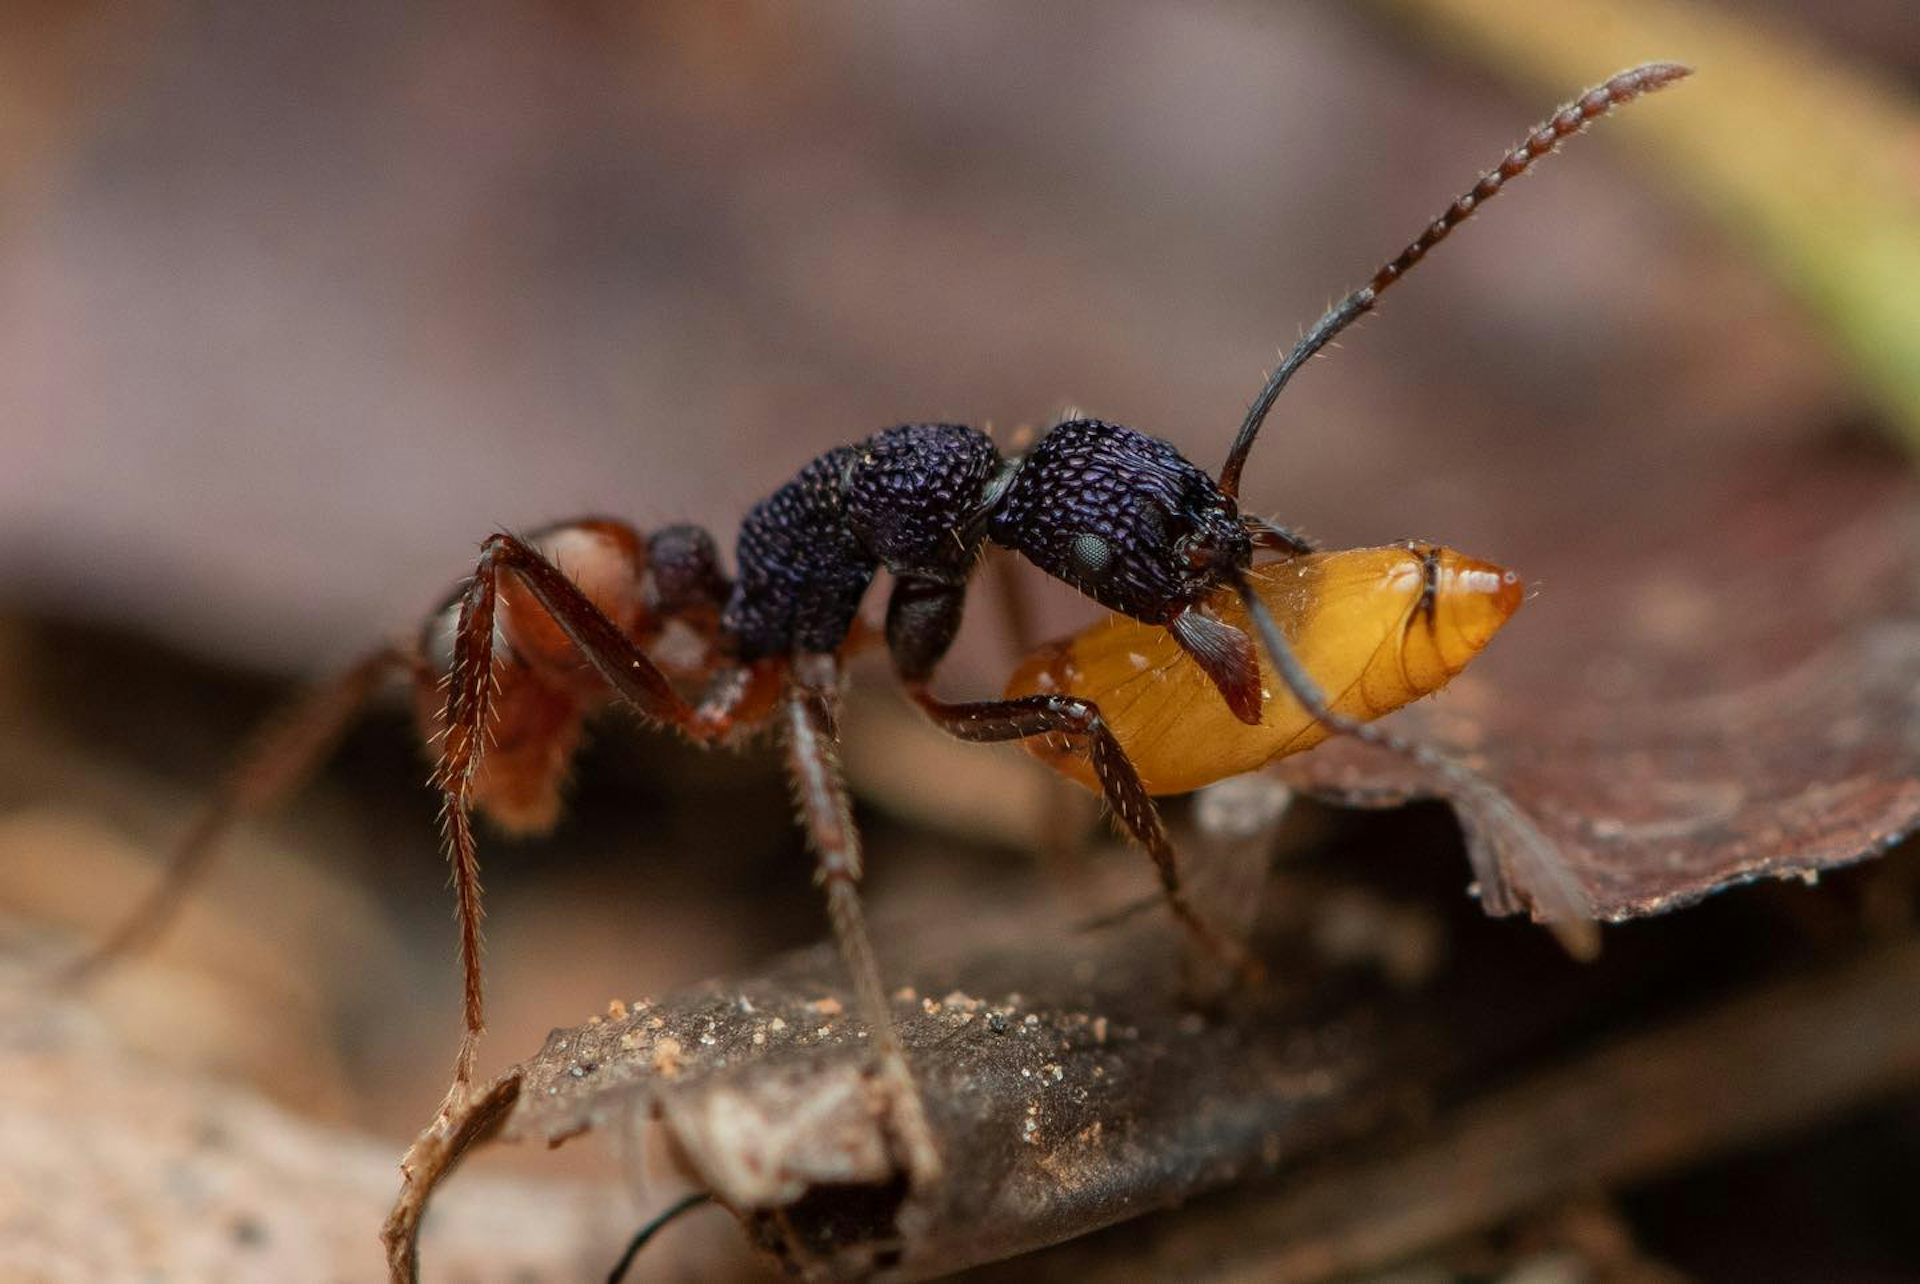 ant carries prey in jaws